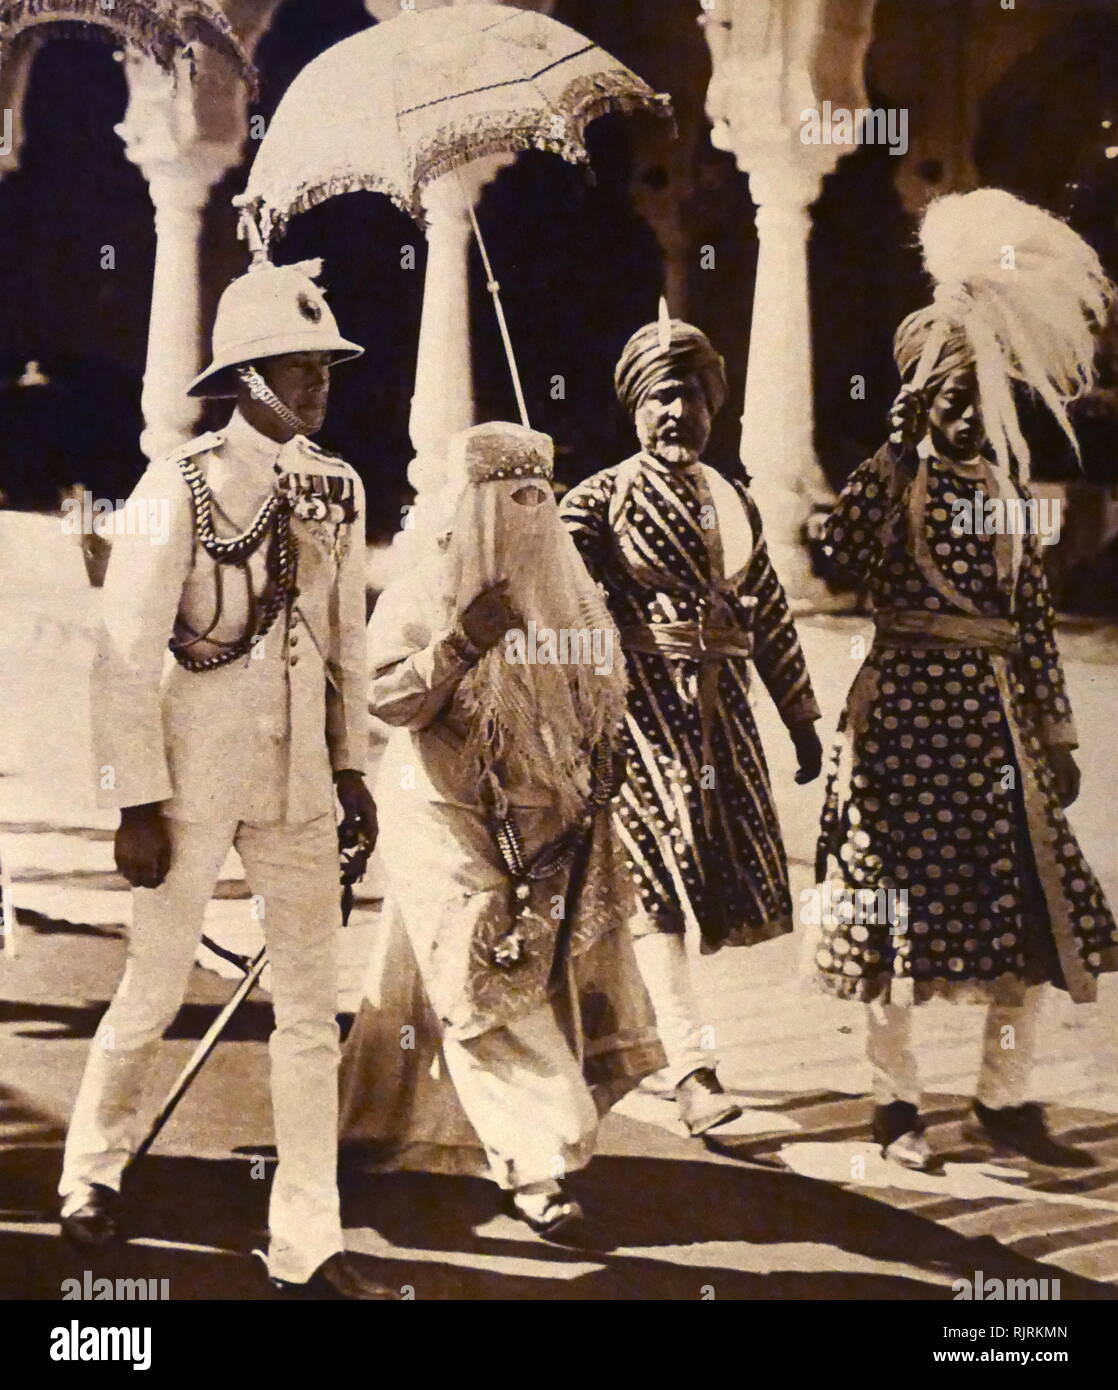 Attending the Delhi Durbar 1911; Hajjah Nawab Begum Sultan Jehan (1858 - 1930), Begum of Bhopal who ruled from 1901 to 1926 Stock Photo